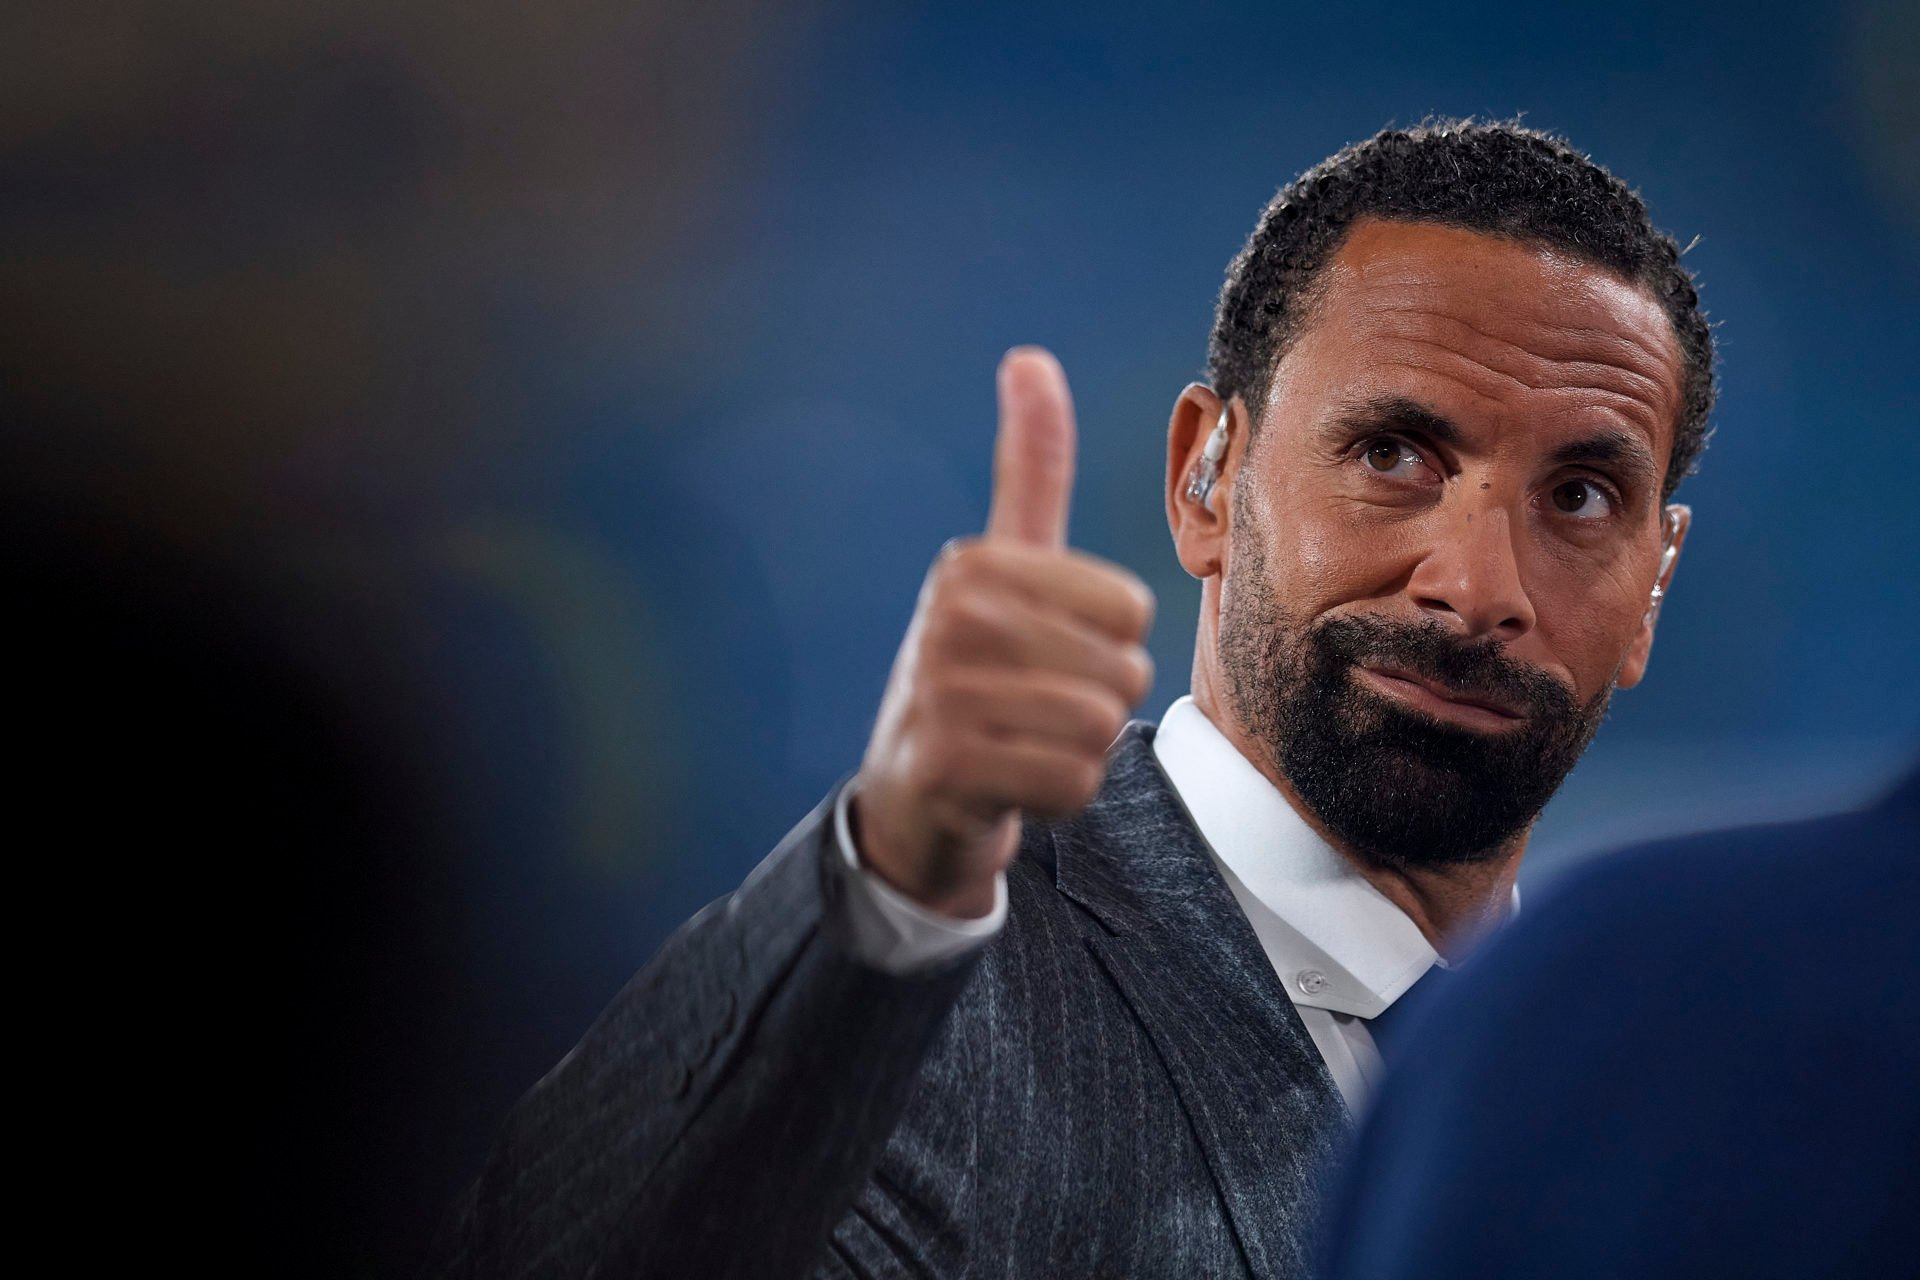 Rio Ferdinand claims one West Ham player's loss of form proved costly